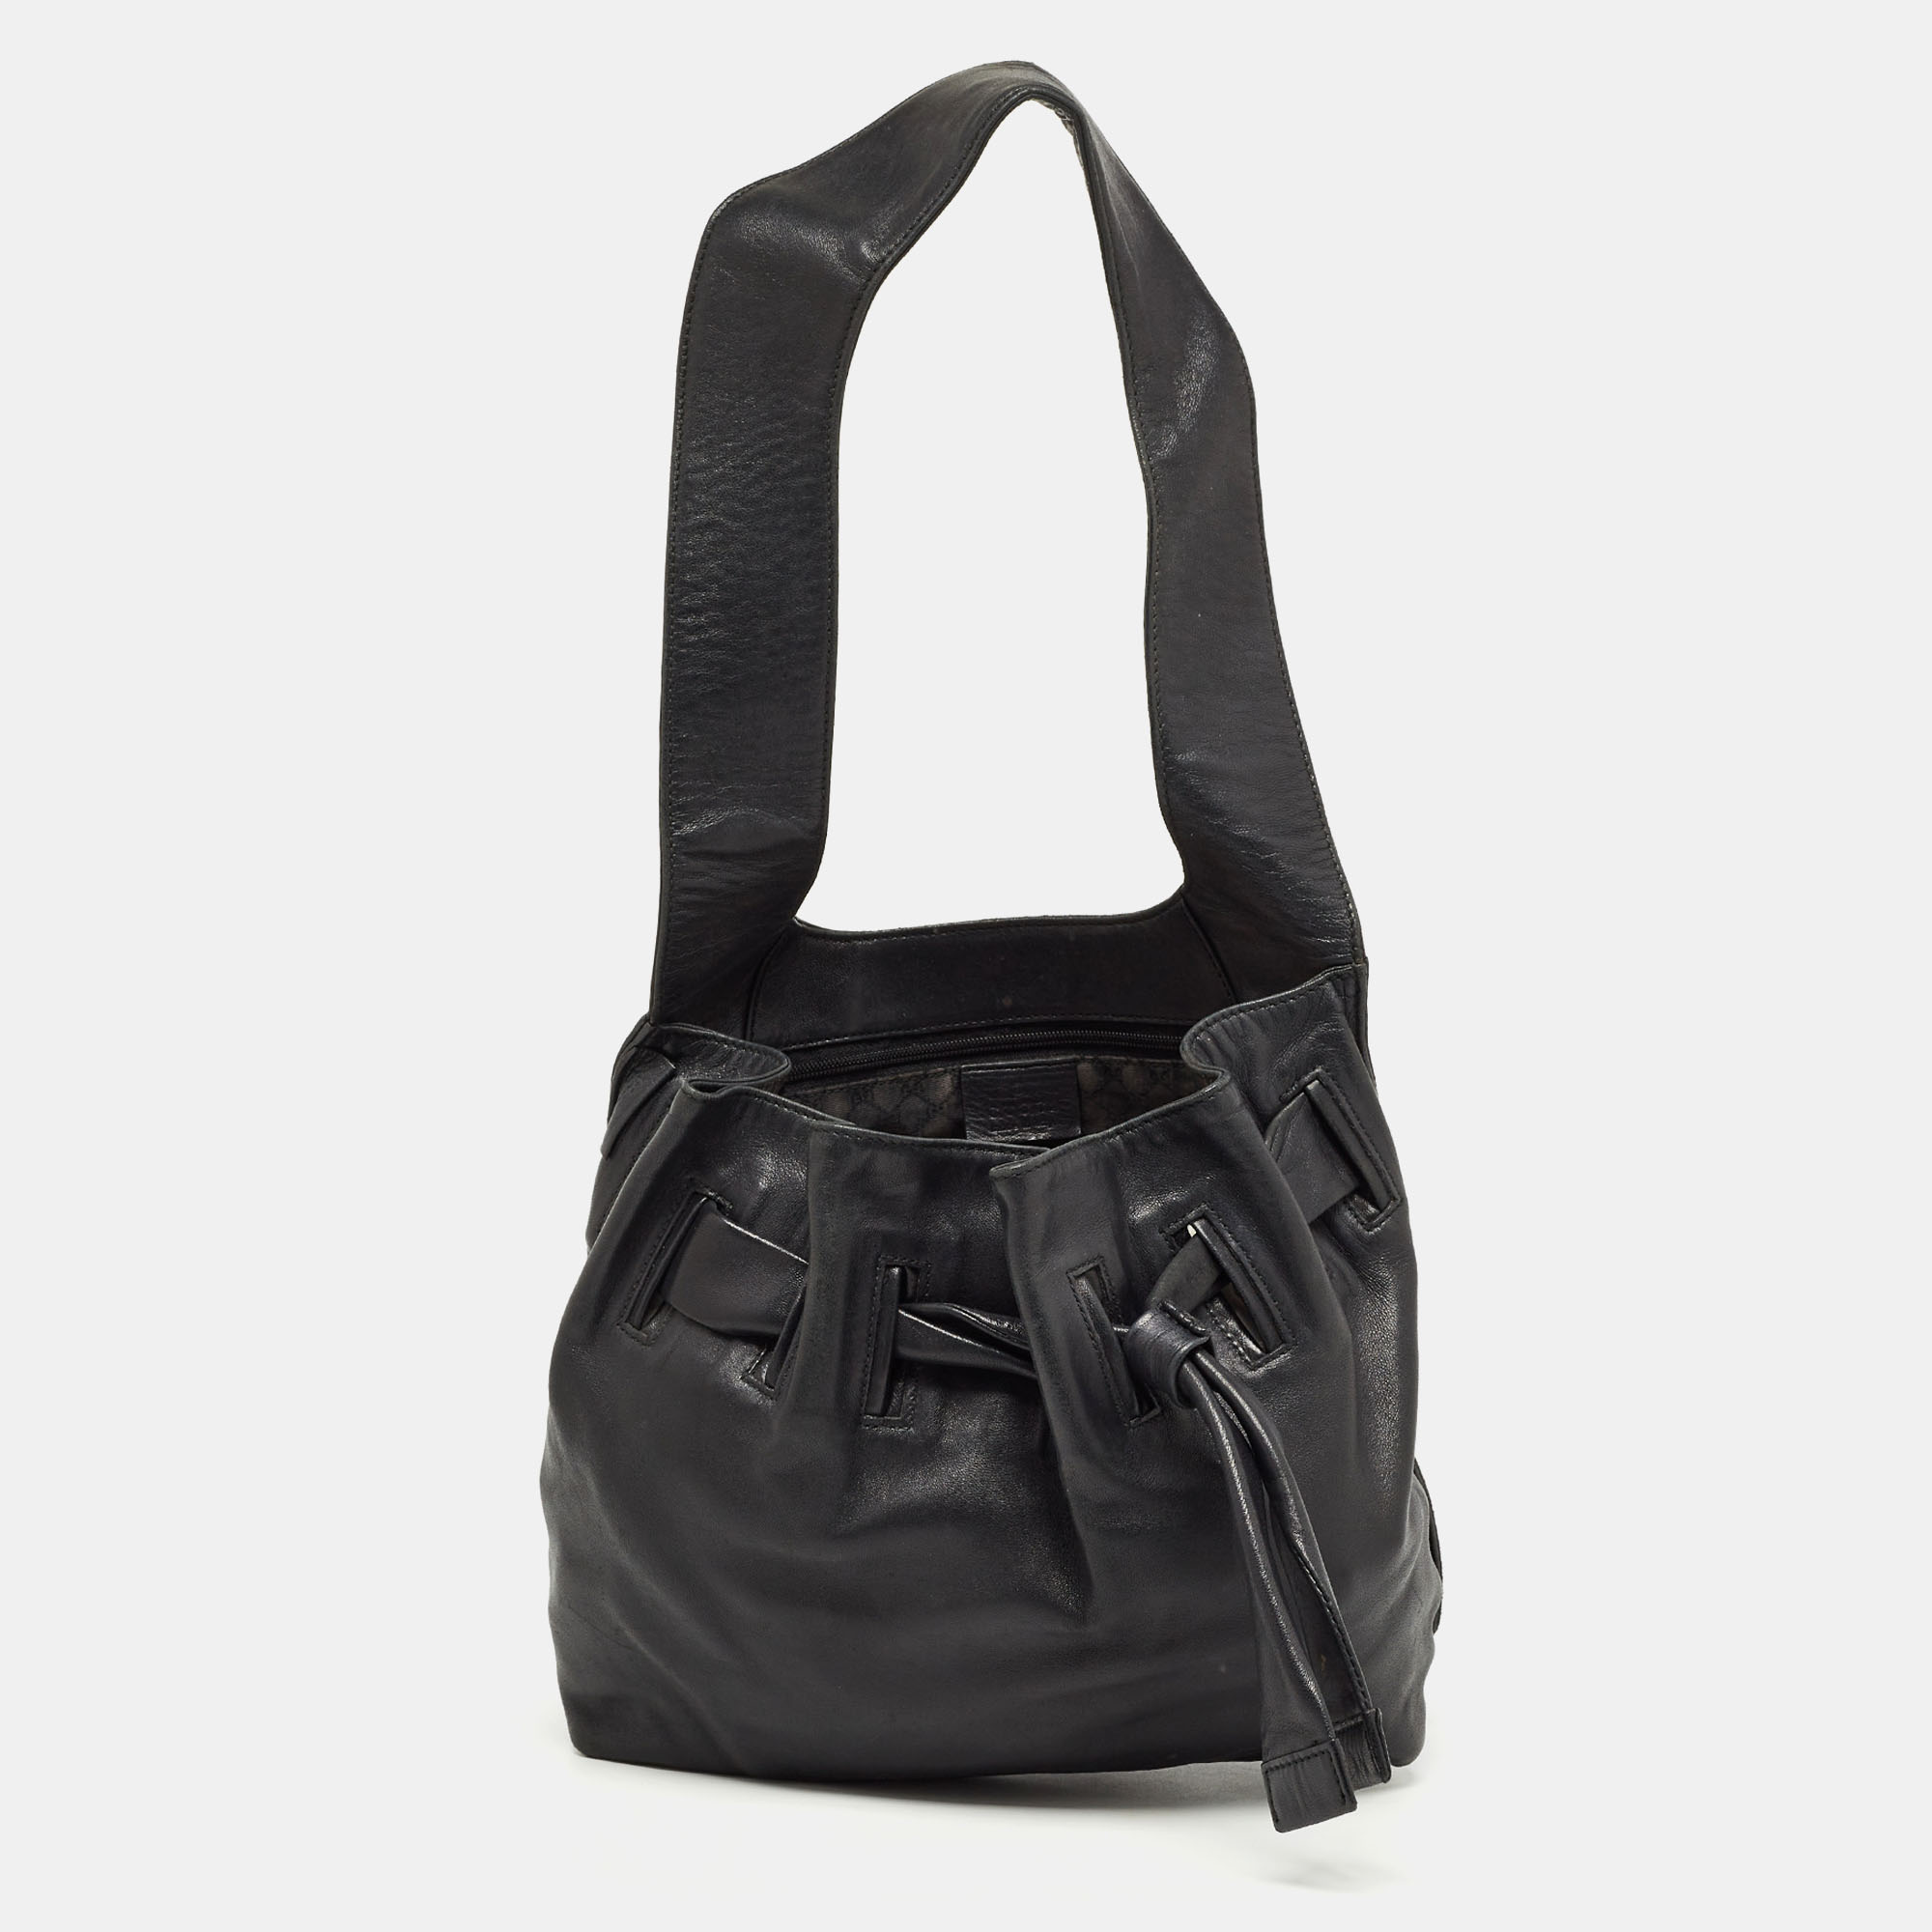 Pre-owned Gucci Black Leather Drawstring Hobo